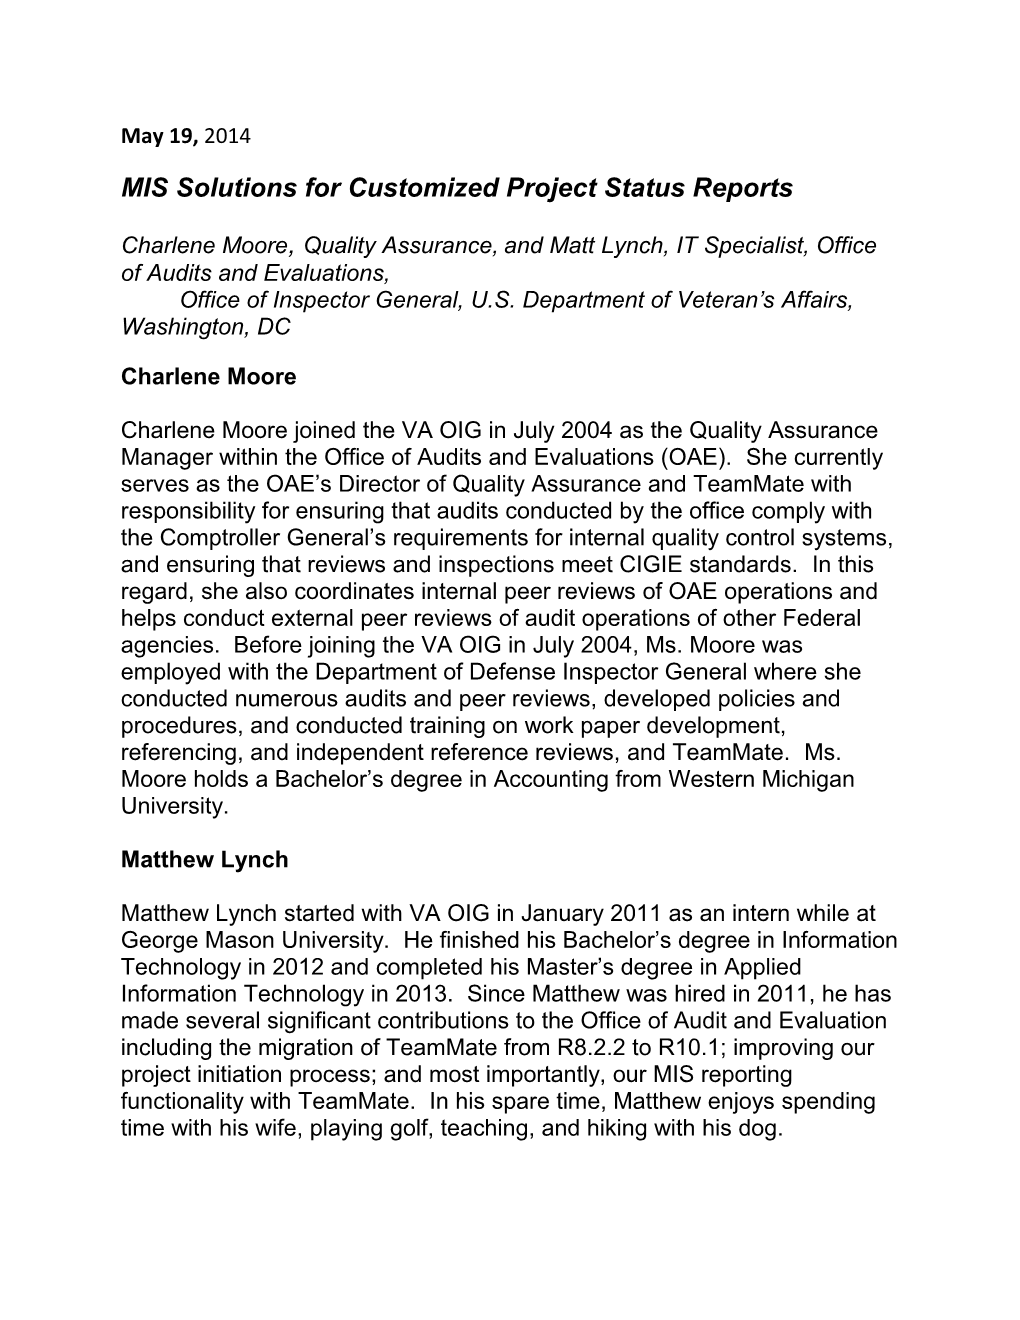 MIS Solutions for Customized Project Status Reports